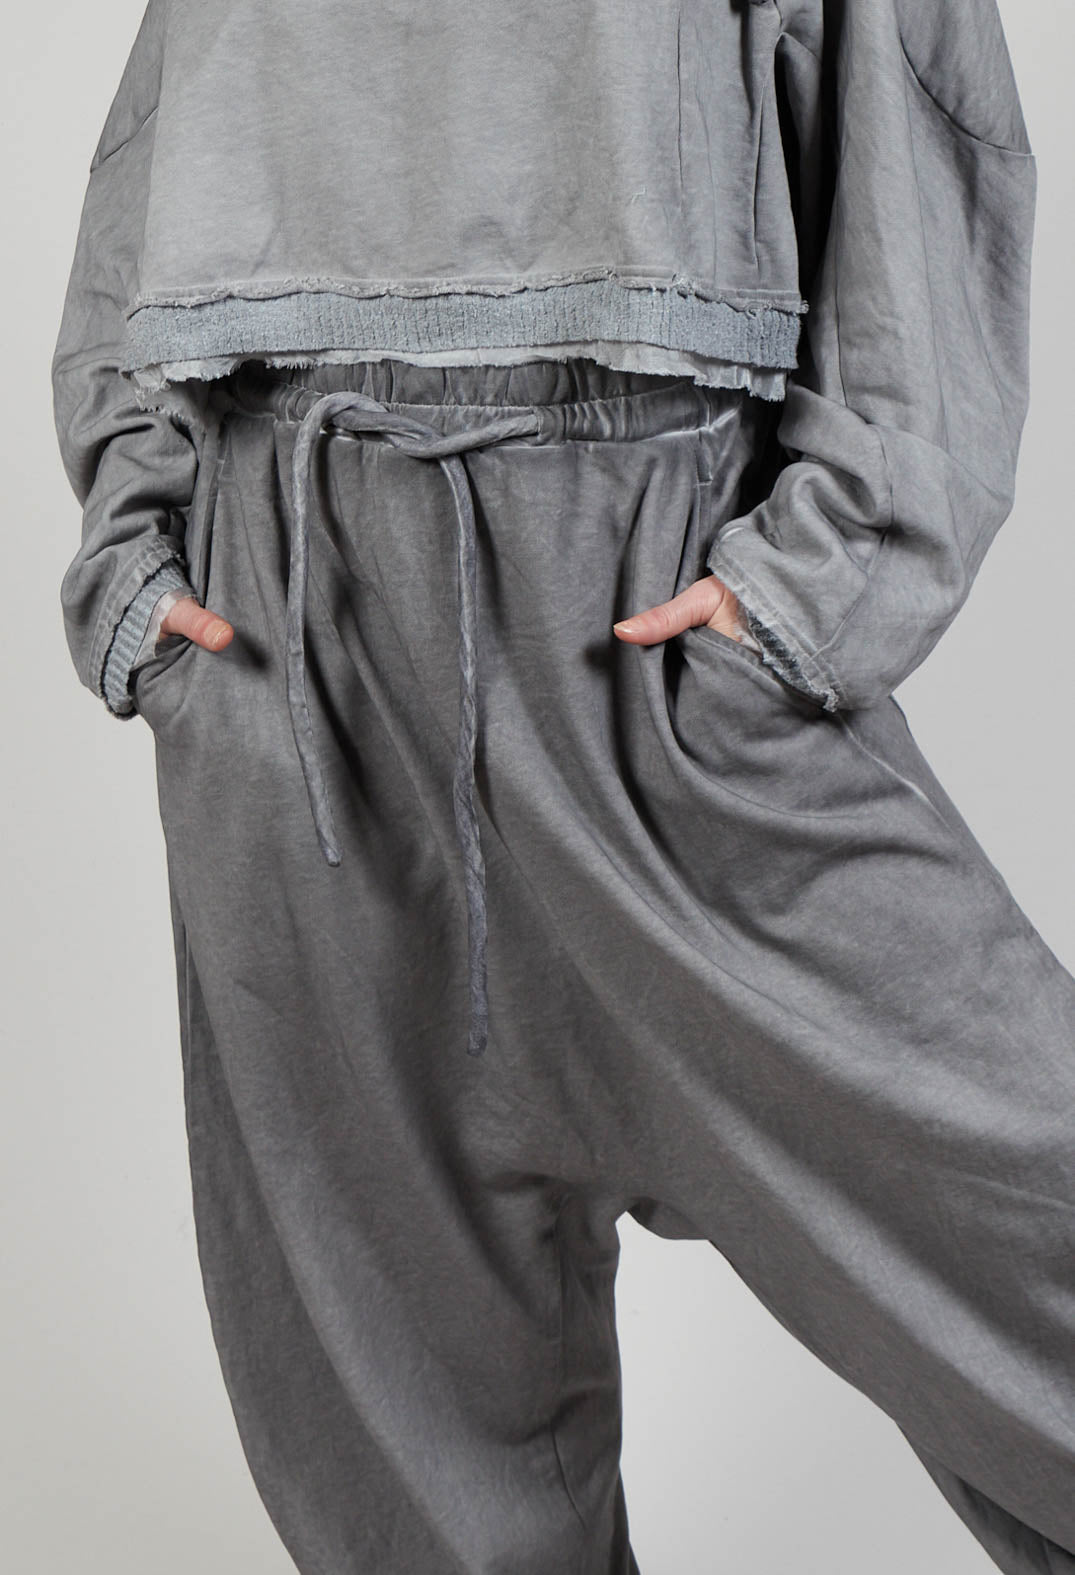 Relaxed Cotton Trousers in C.Coal 70% Cloud